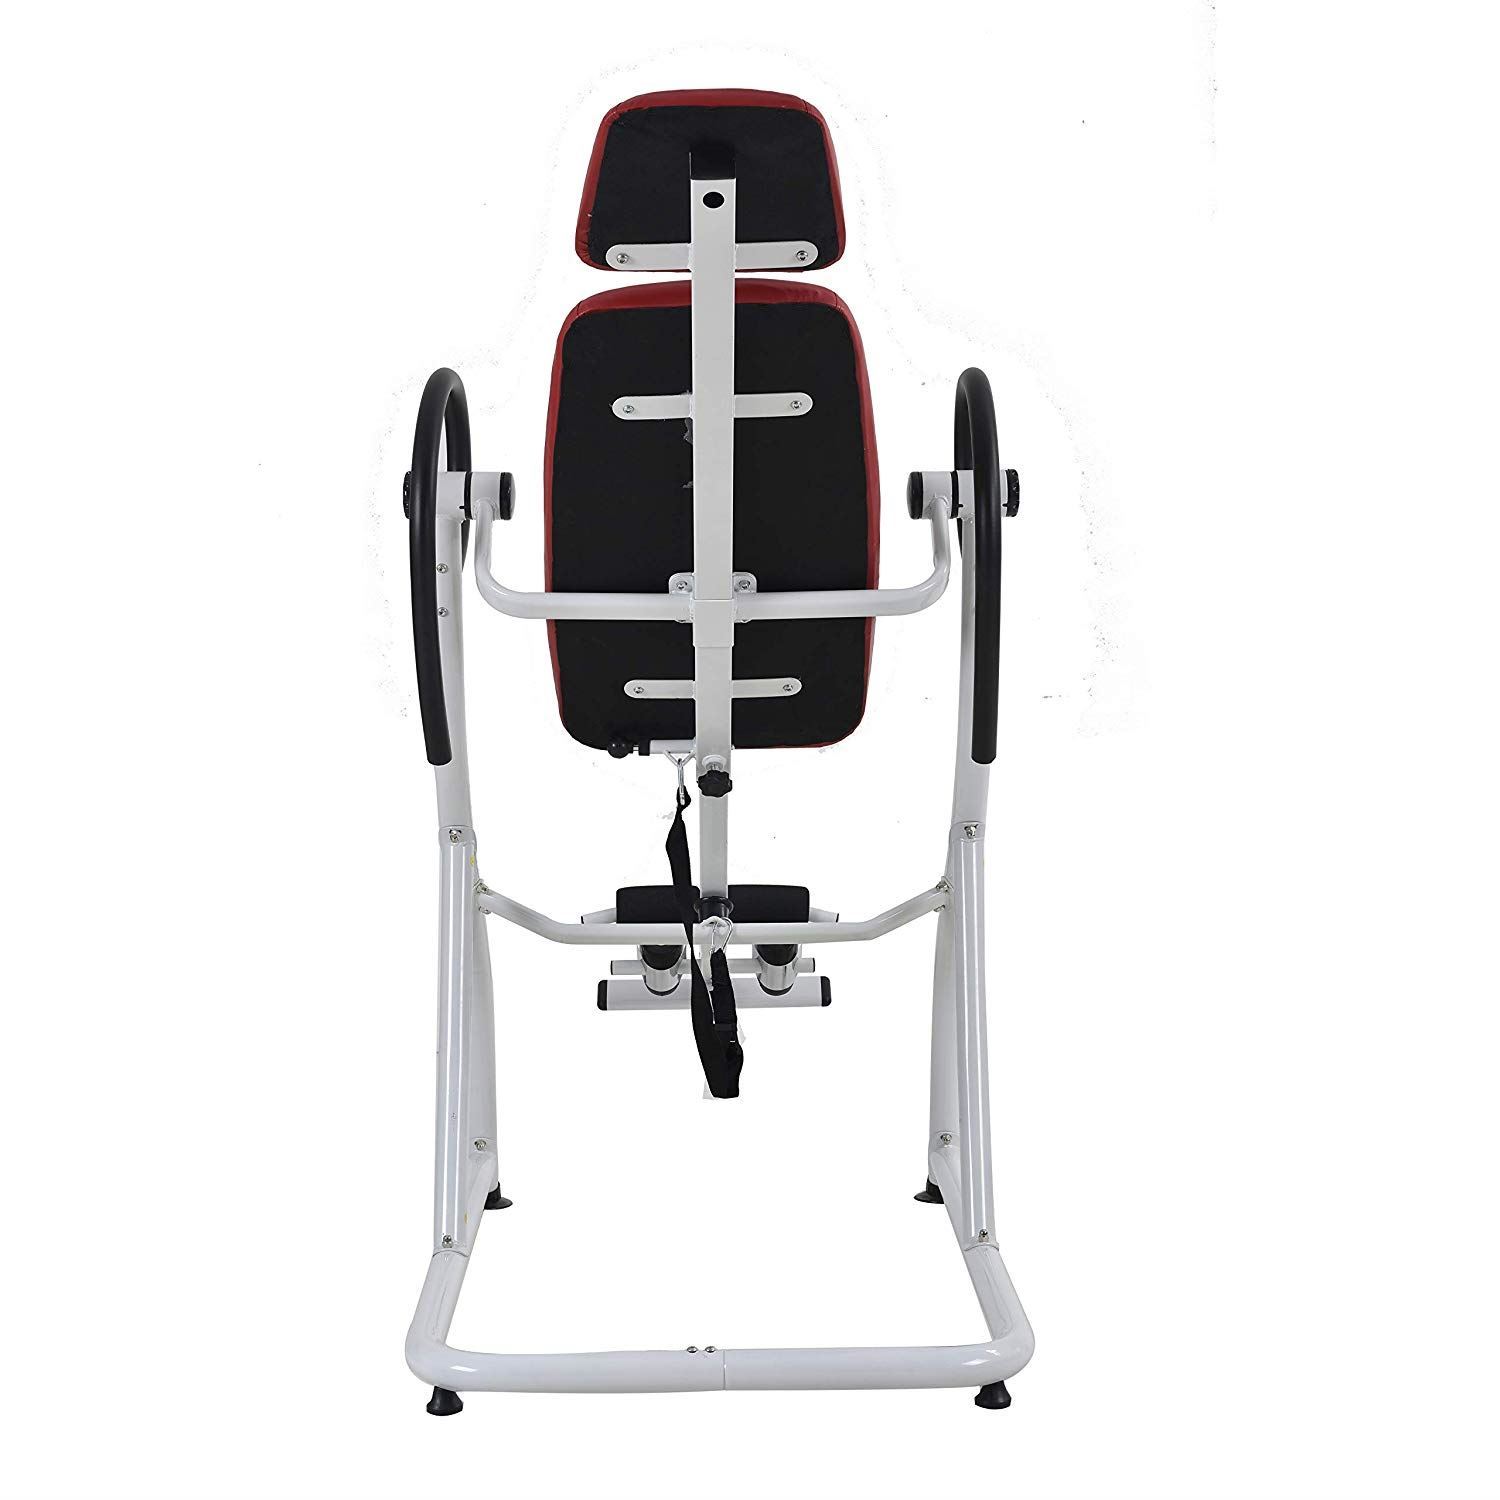 Klarfit Relax Zone Inversion Table • Back Hang Ups • Max Load 150kg • 180 Max Inversion • Steel Frame • Prevents Back Pain and Muscle Tension • Increases Blood Circulation • Stretches the Spine and Surrounding Muscle Gr 